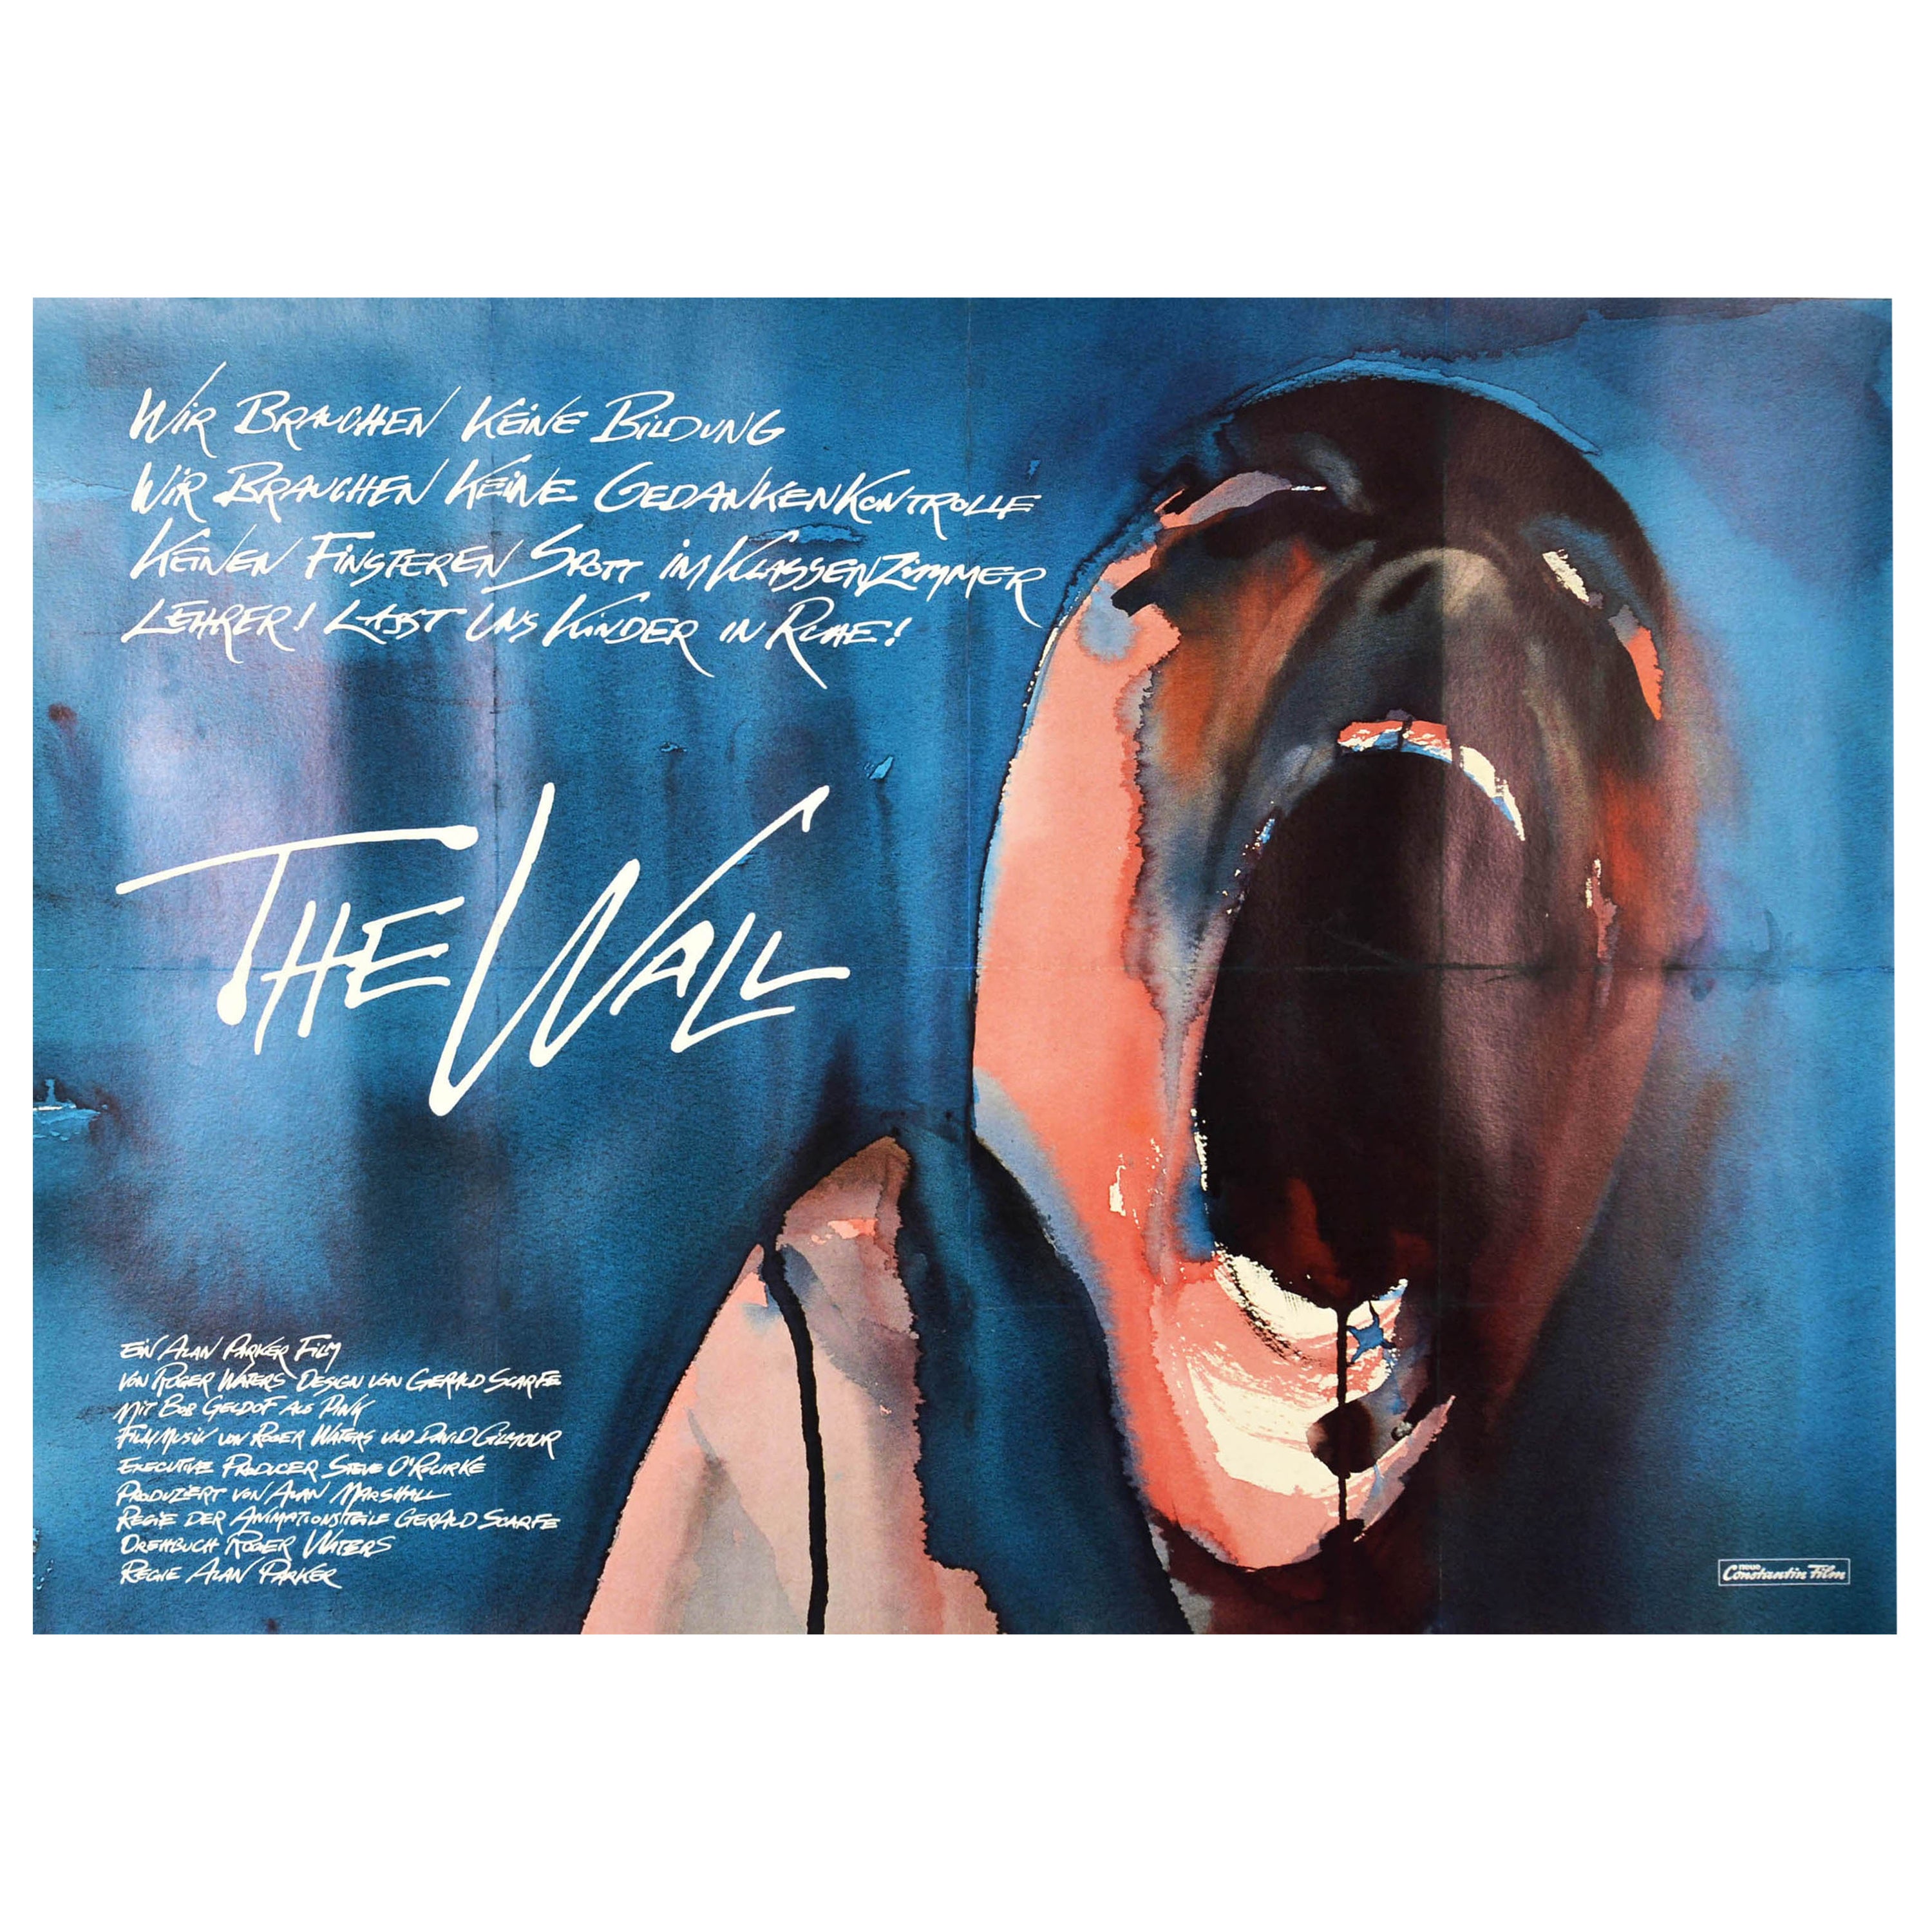 Affiche vintage d'origine Pink Floyd Another Brick In The Wall Rock Music, Film d'art